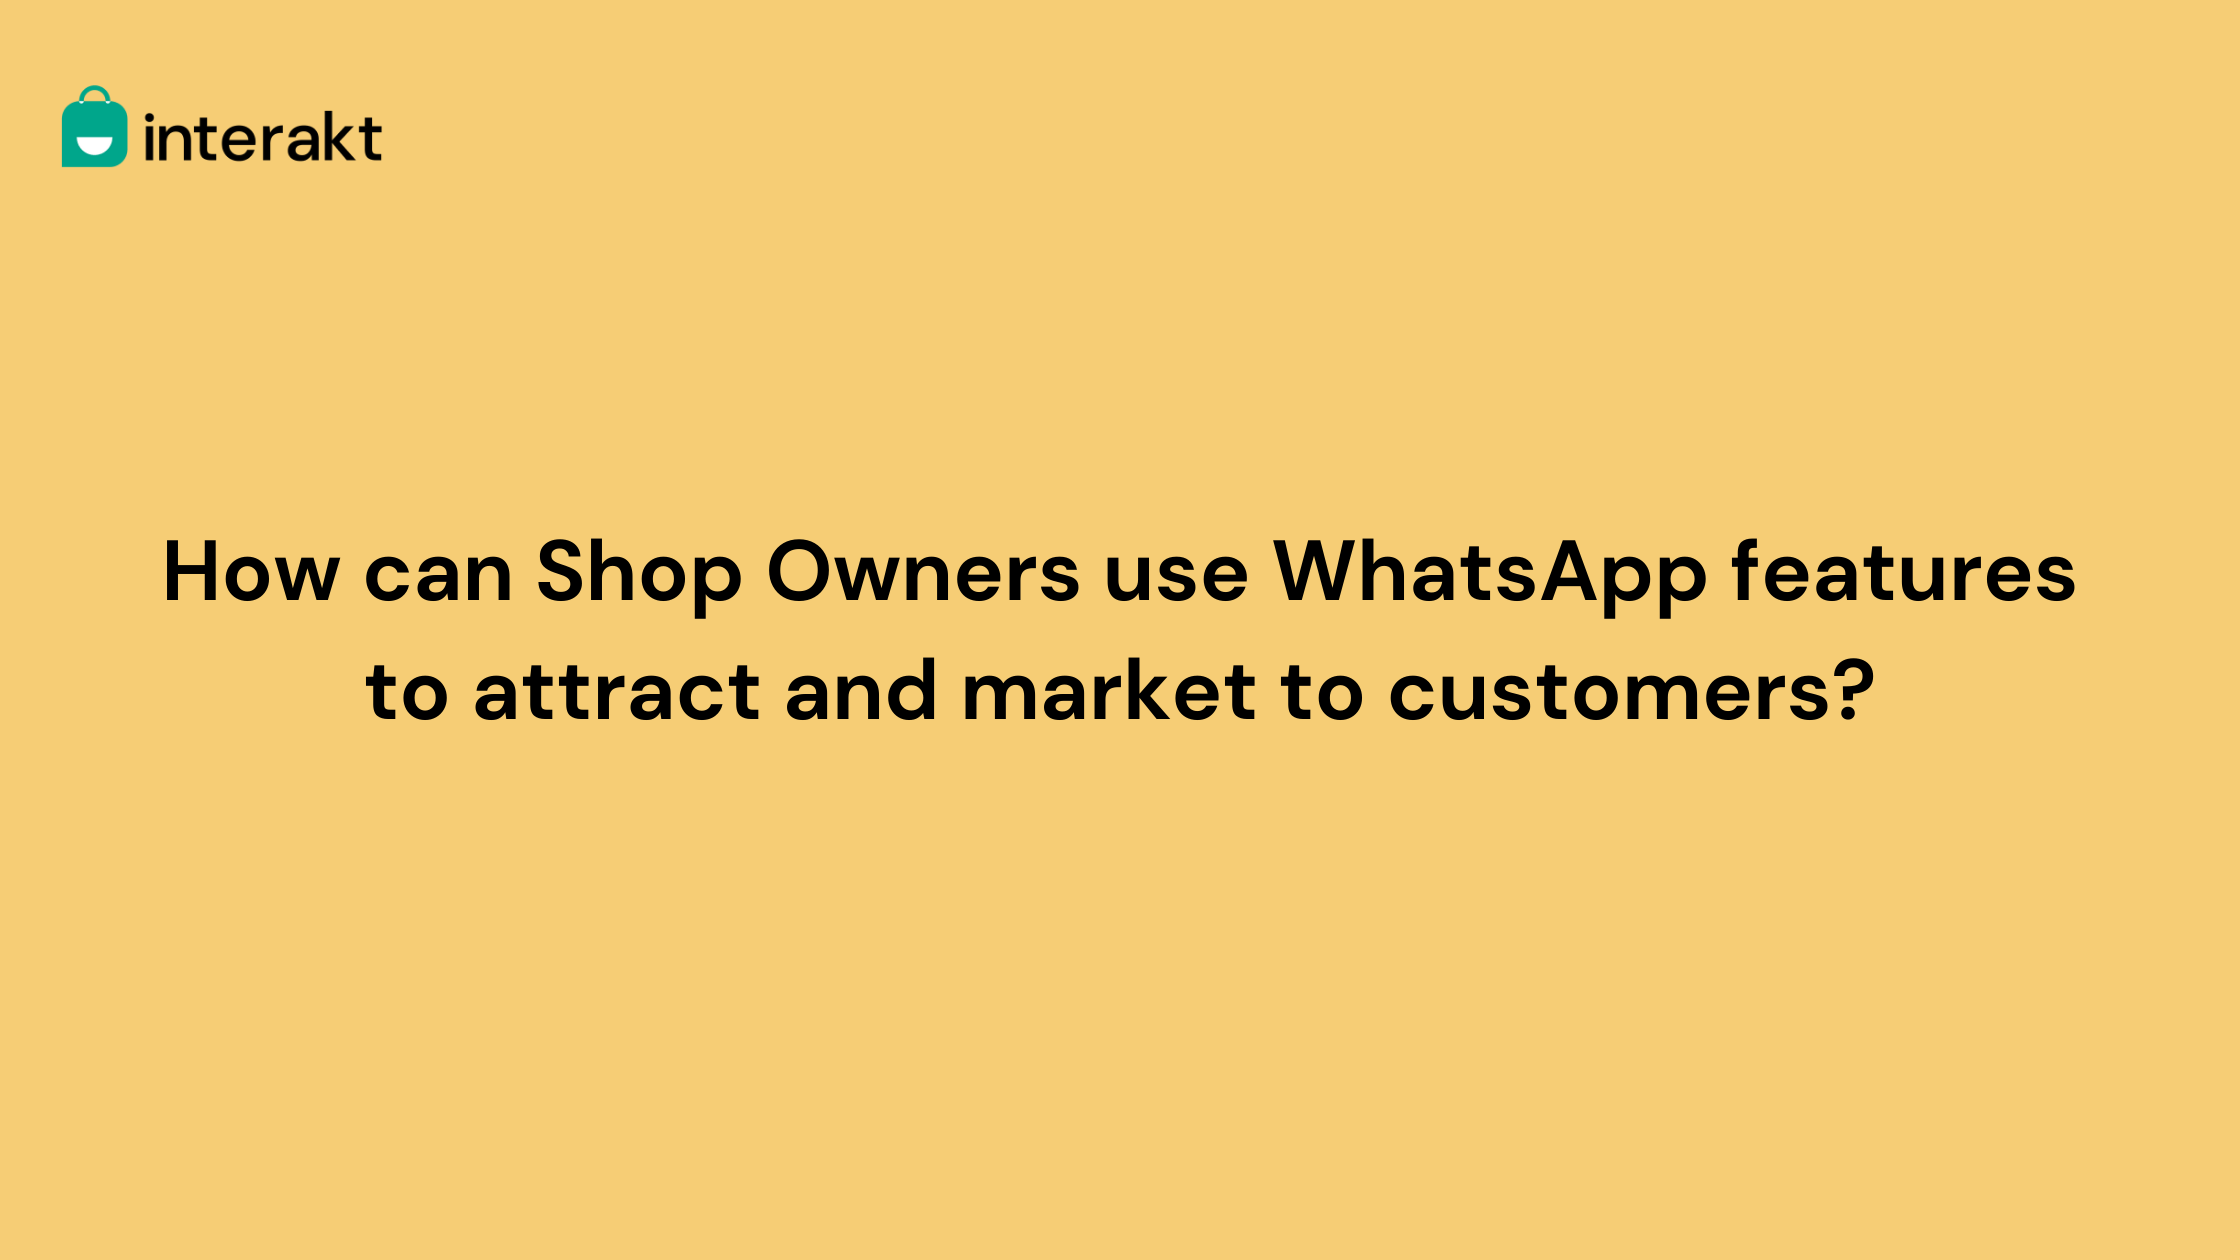 How can Shop Owners use WhatsApp features